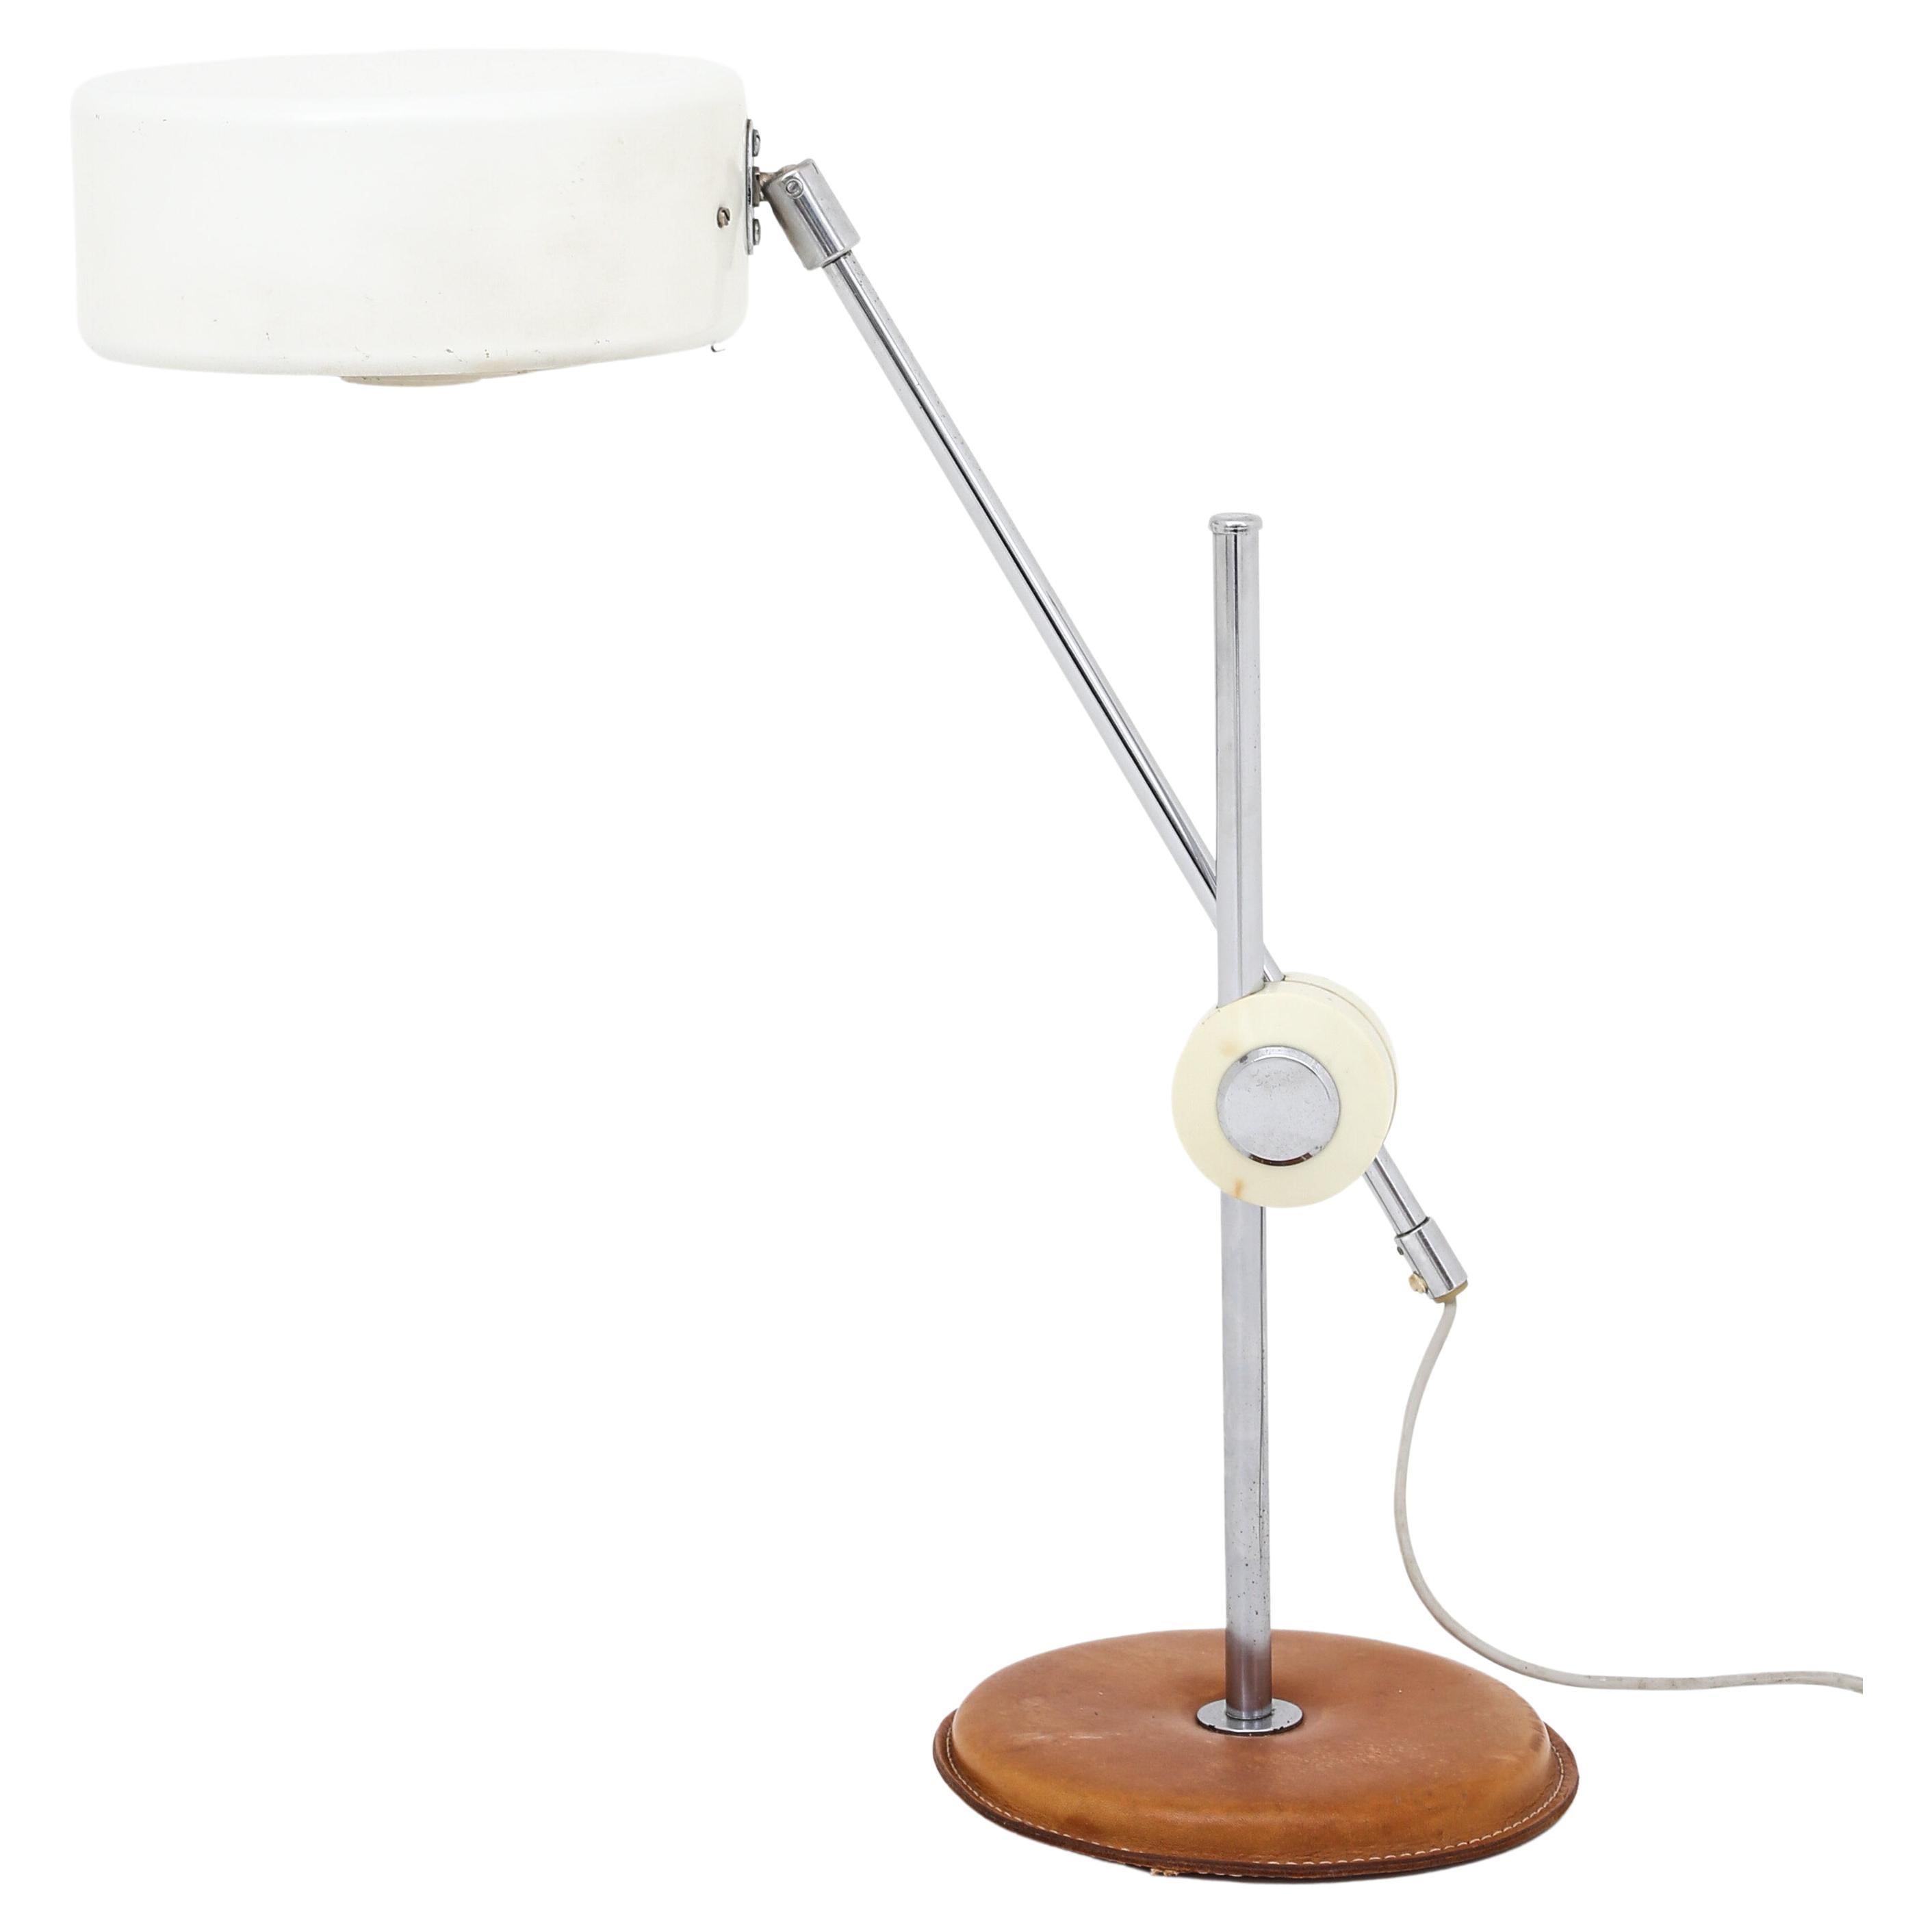 Olympia Lamp - 5 For Sale on 1stDibs | olympia outdoor lamps, olympia  lighting